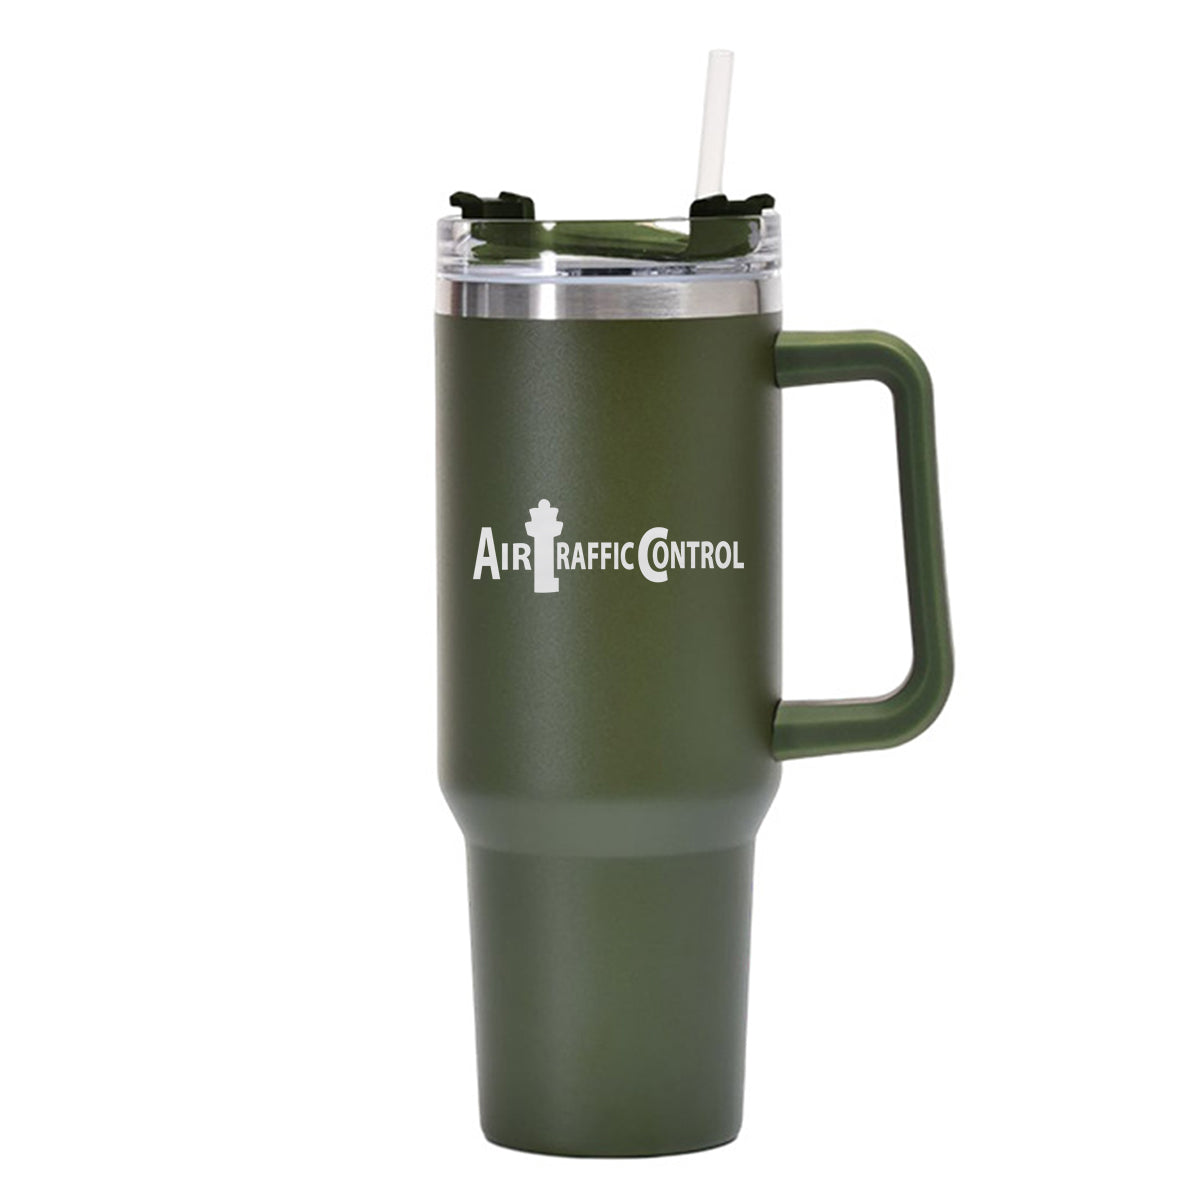 Air Traffic Control Designed 40oz Stainless Steel Car Mug With Holder